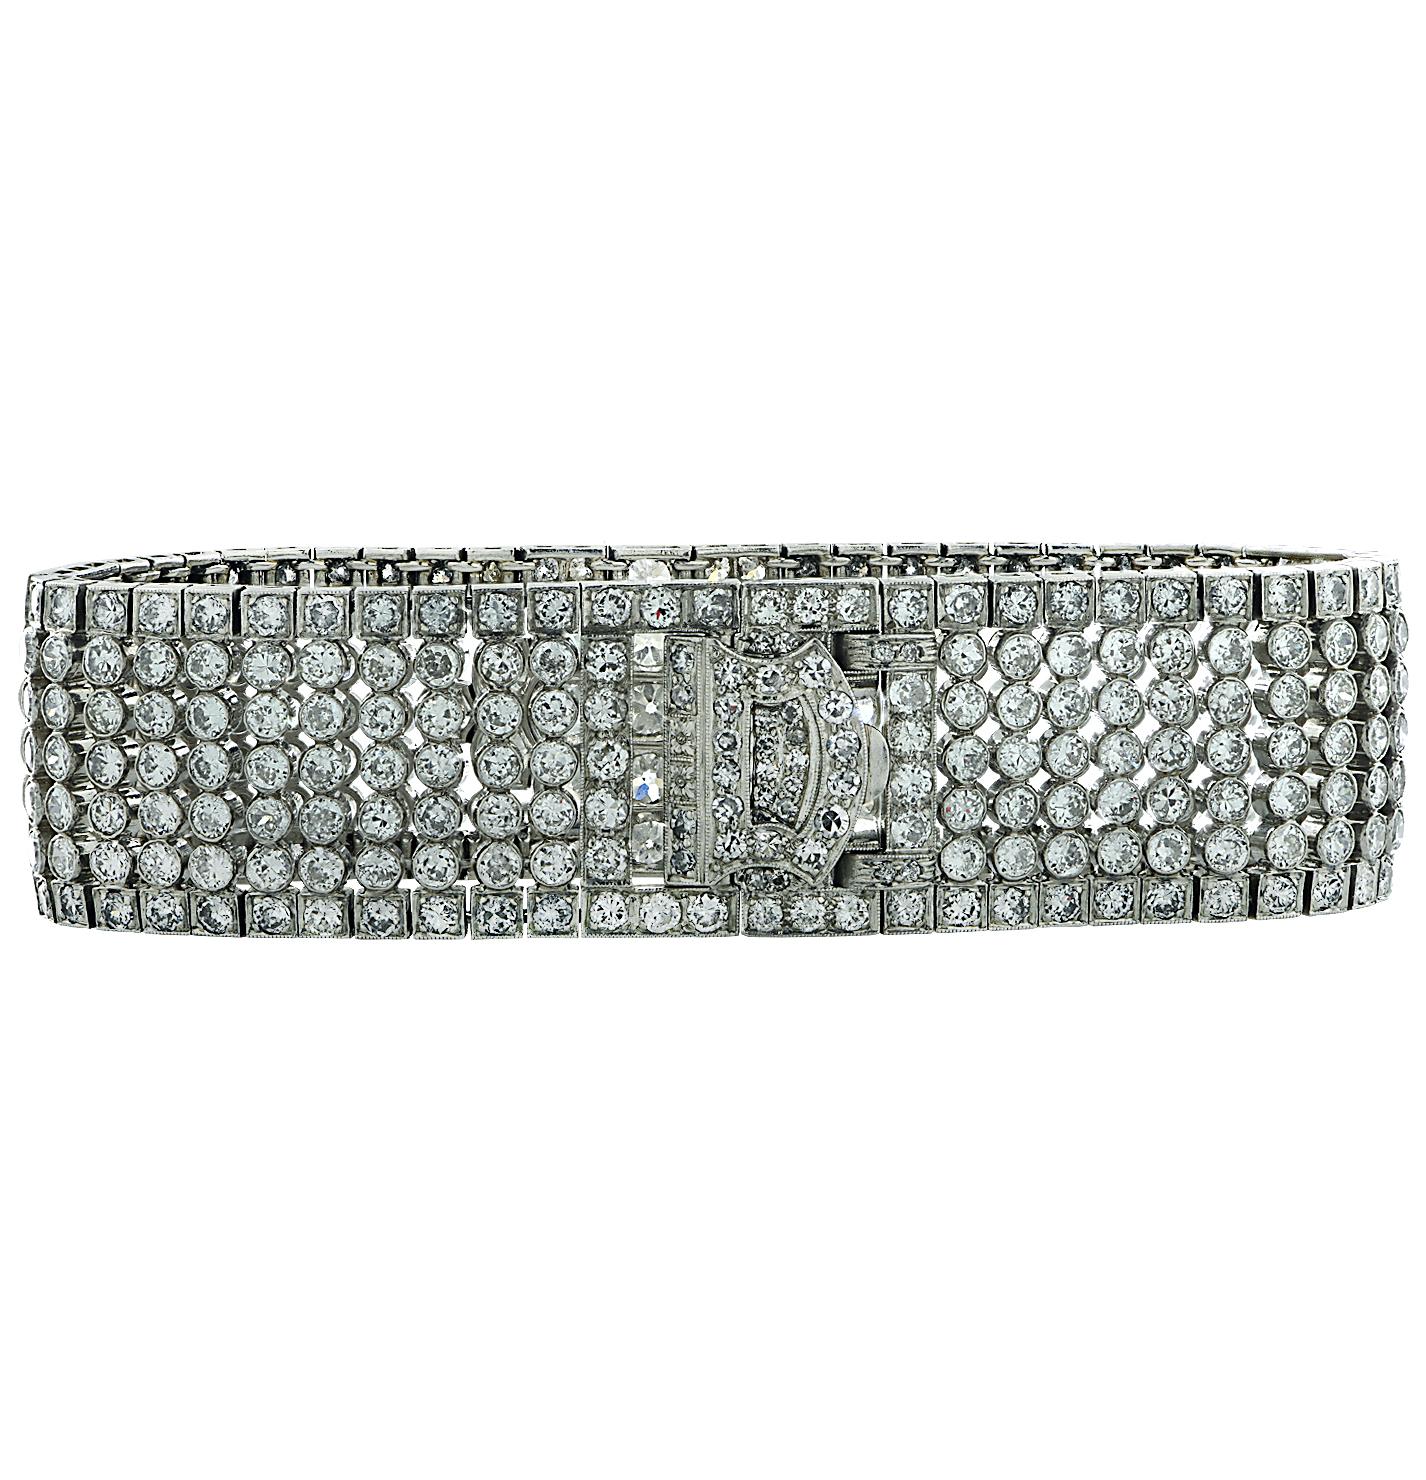 Spectacular Art Deco bangle bracelet crafted in platinum featuring round brilliant cut diamonds weighing approximately 15 carats total, G color, VS clarity. Diamonds, meticulously bezel set and detailed with milgrain, are arranged in a fine open